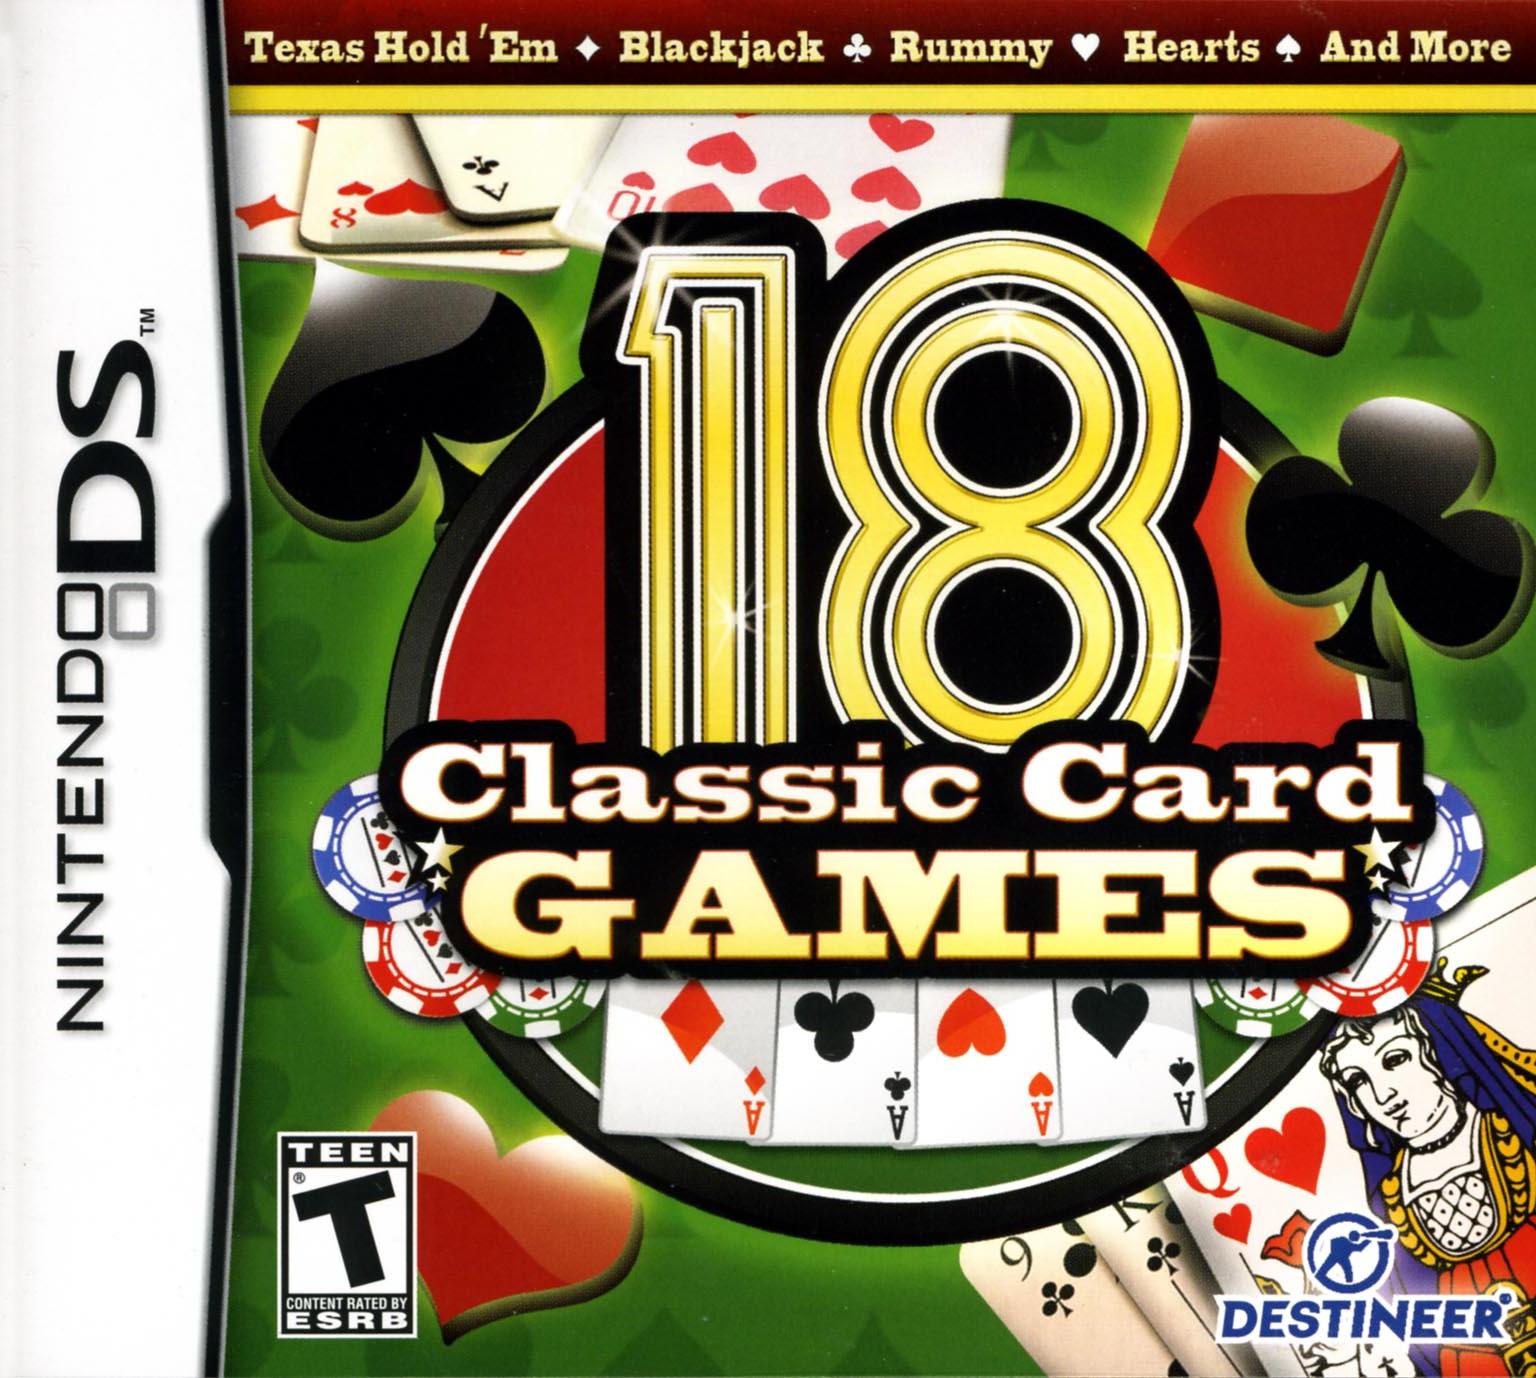 18 Classic Card Games, Destineer, Nintendo DS, 828068213398 - image 1 of 1